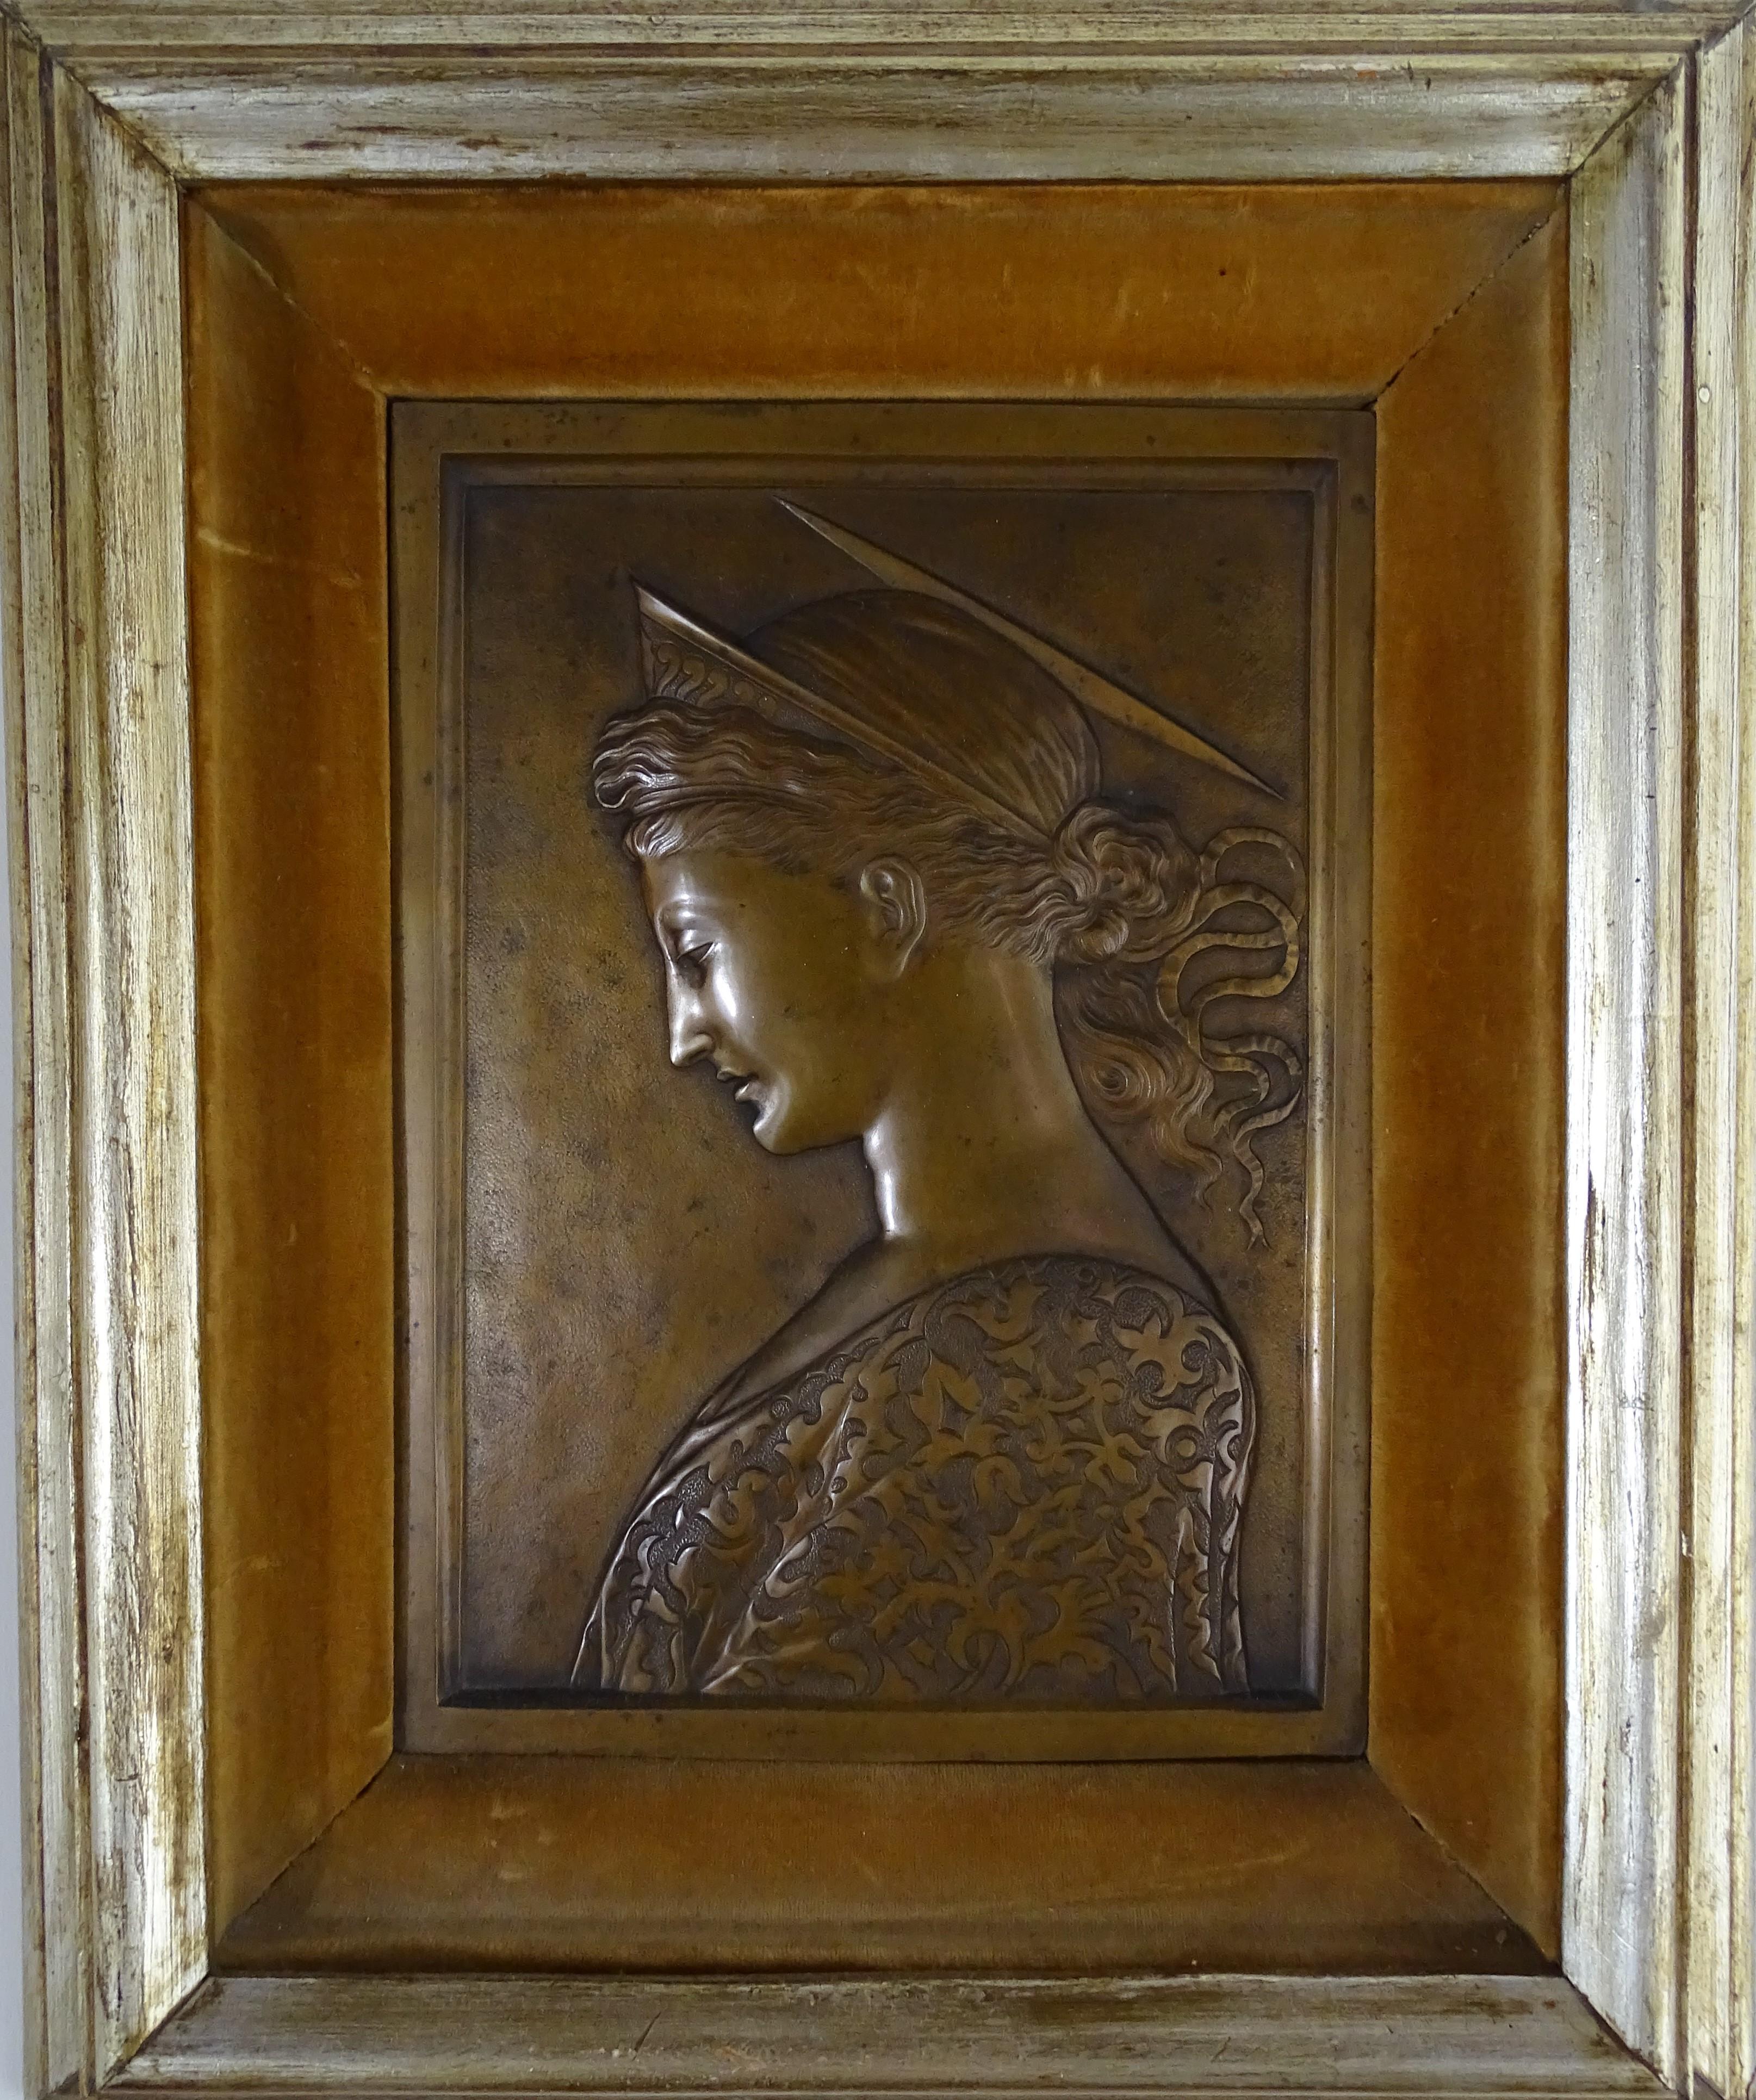 Unknown Figurative Sculpture - Early 20th Century Bronze Relief Pre-Raphaelite French School Profile of a Woman